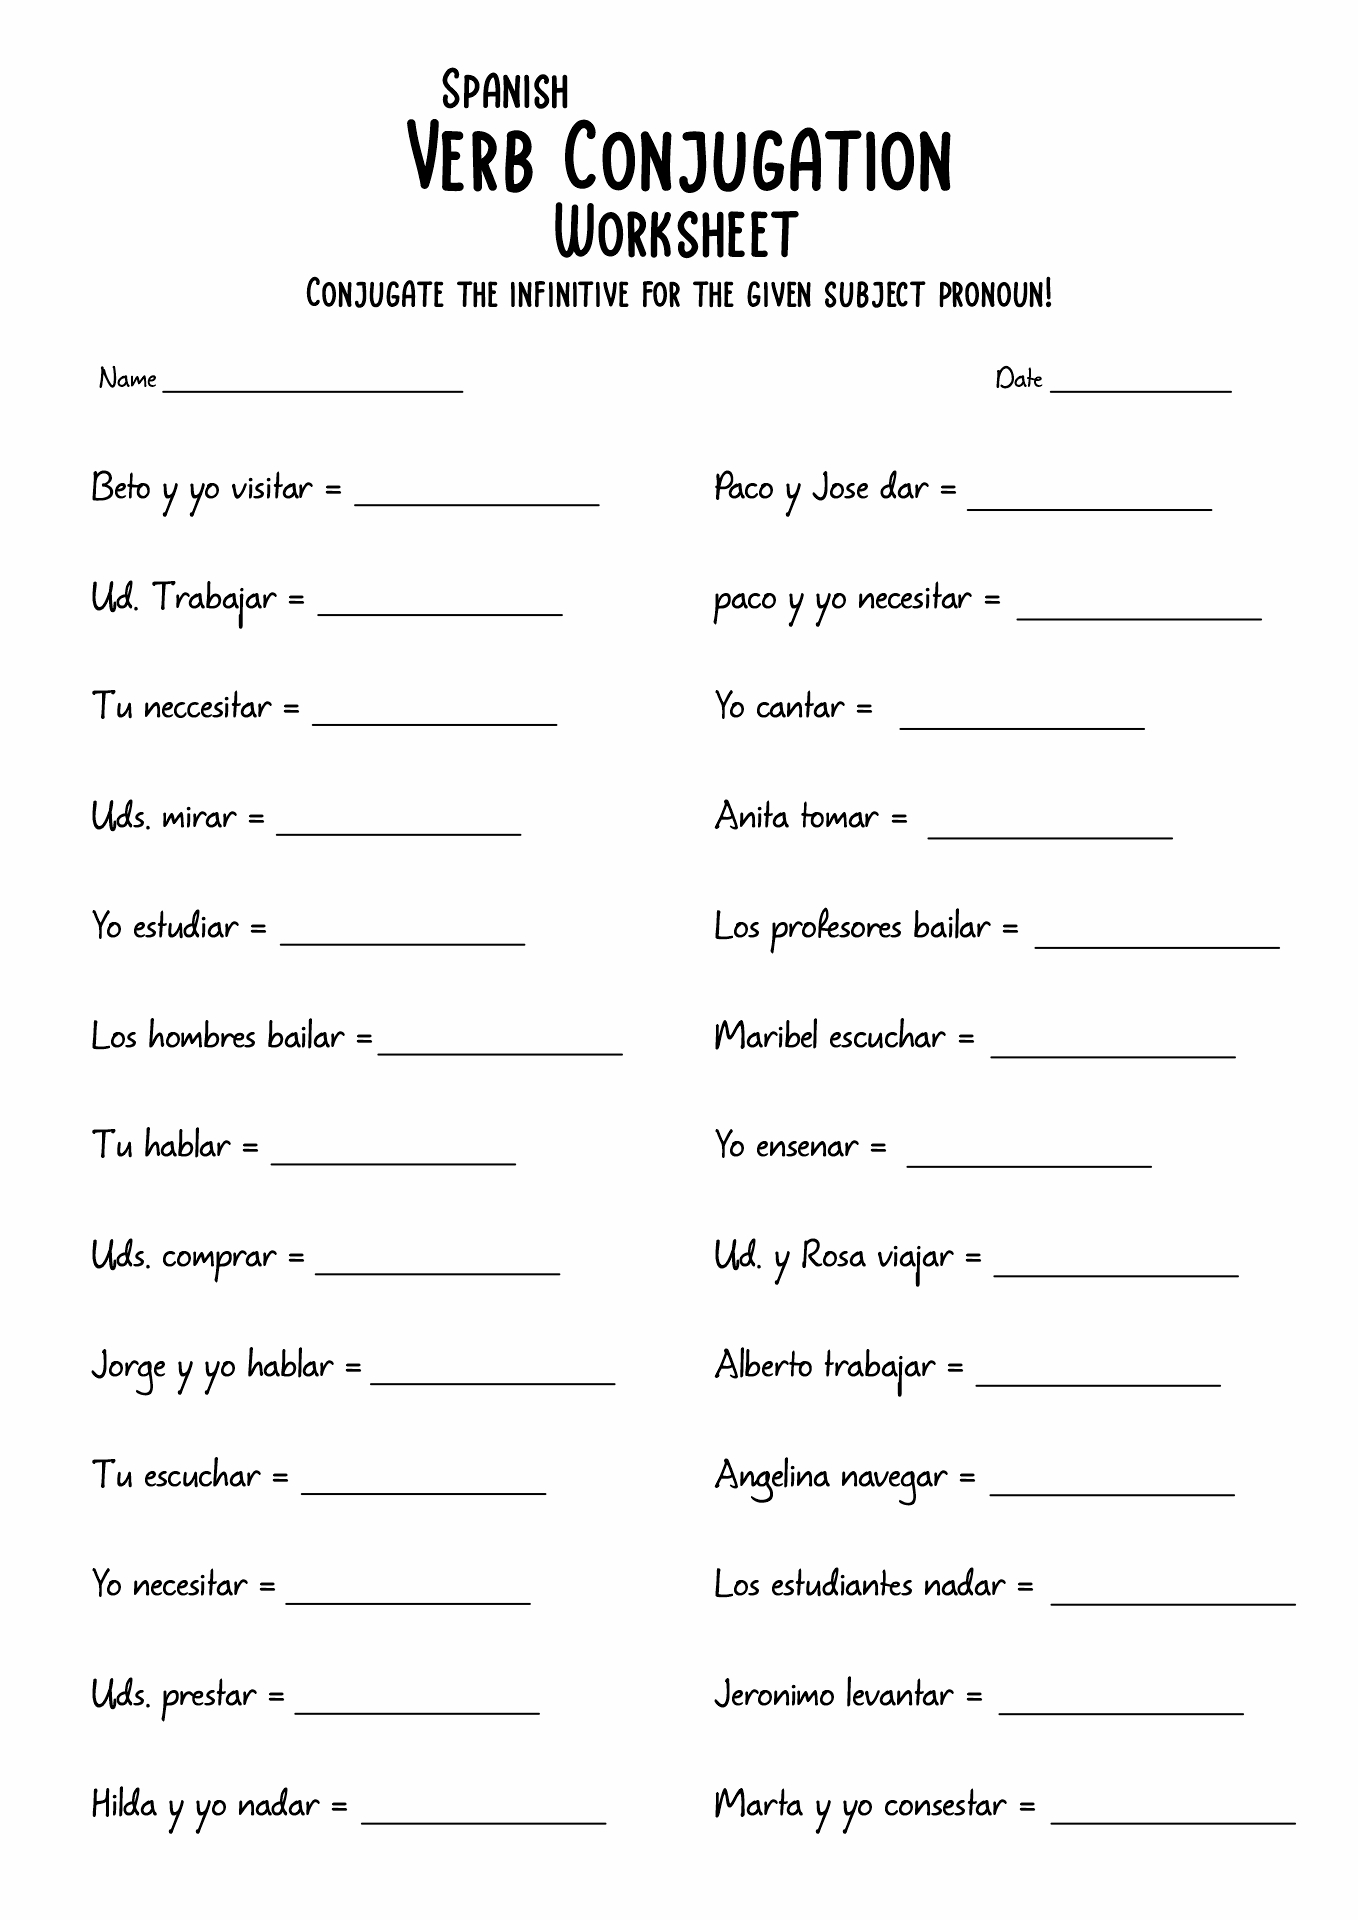 best-images-of-spanish-conjugation-worksheets-spanish-verb-my-xxx-hot-girl